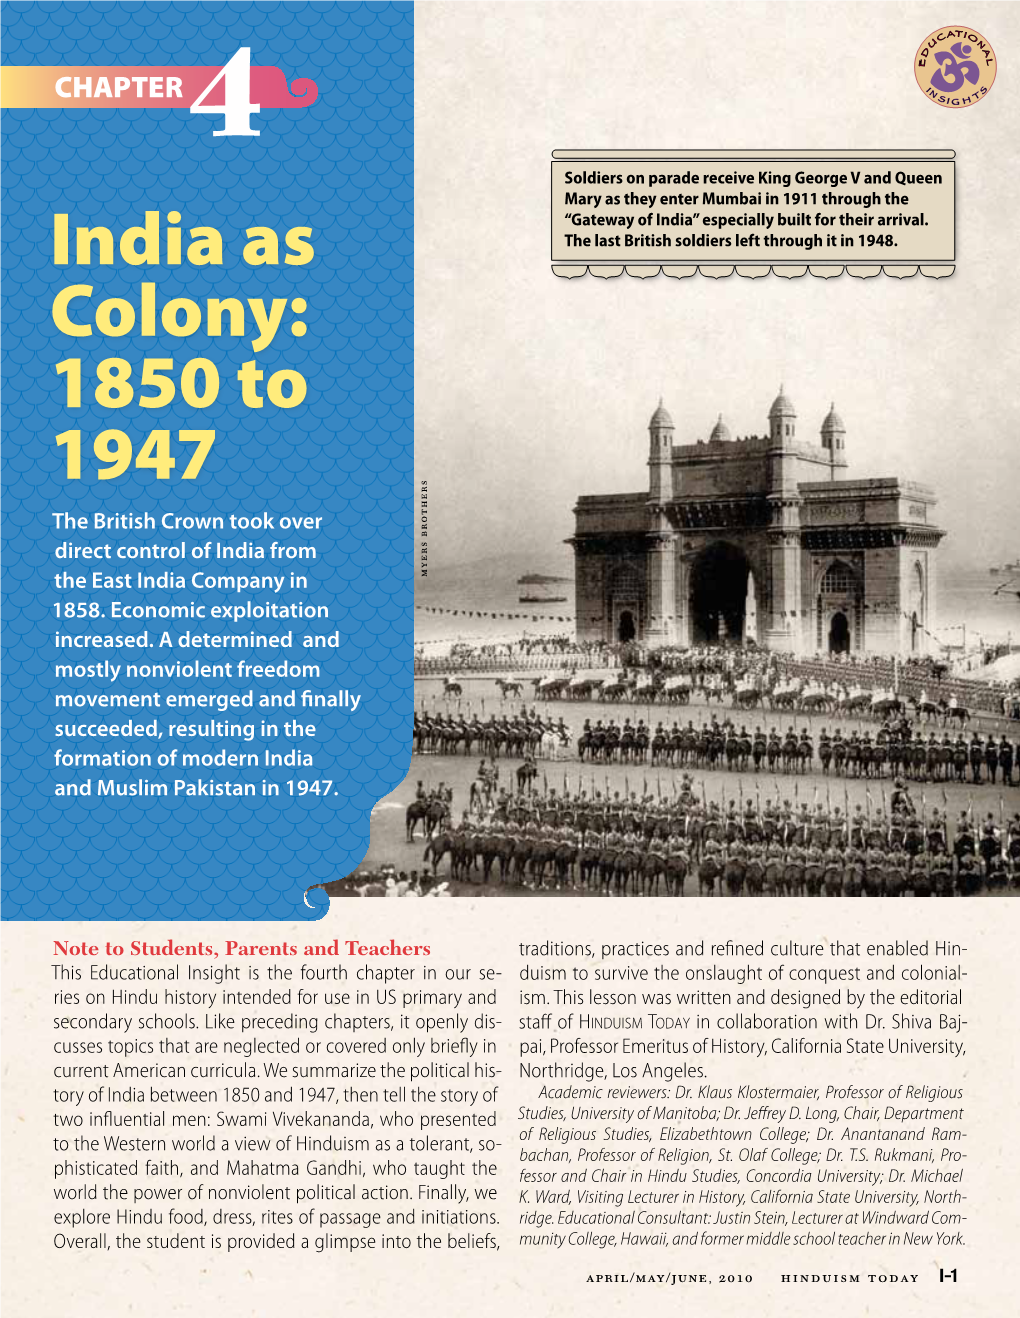 India As Colony: 1850 to 1947